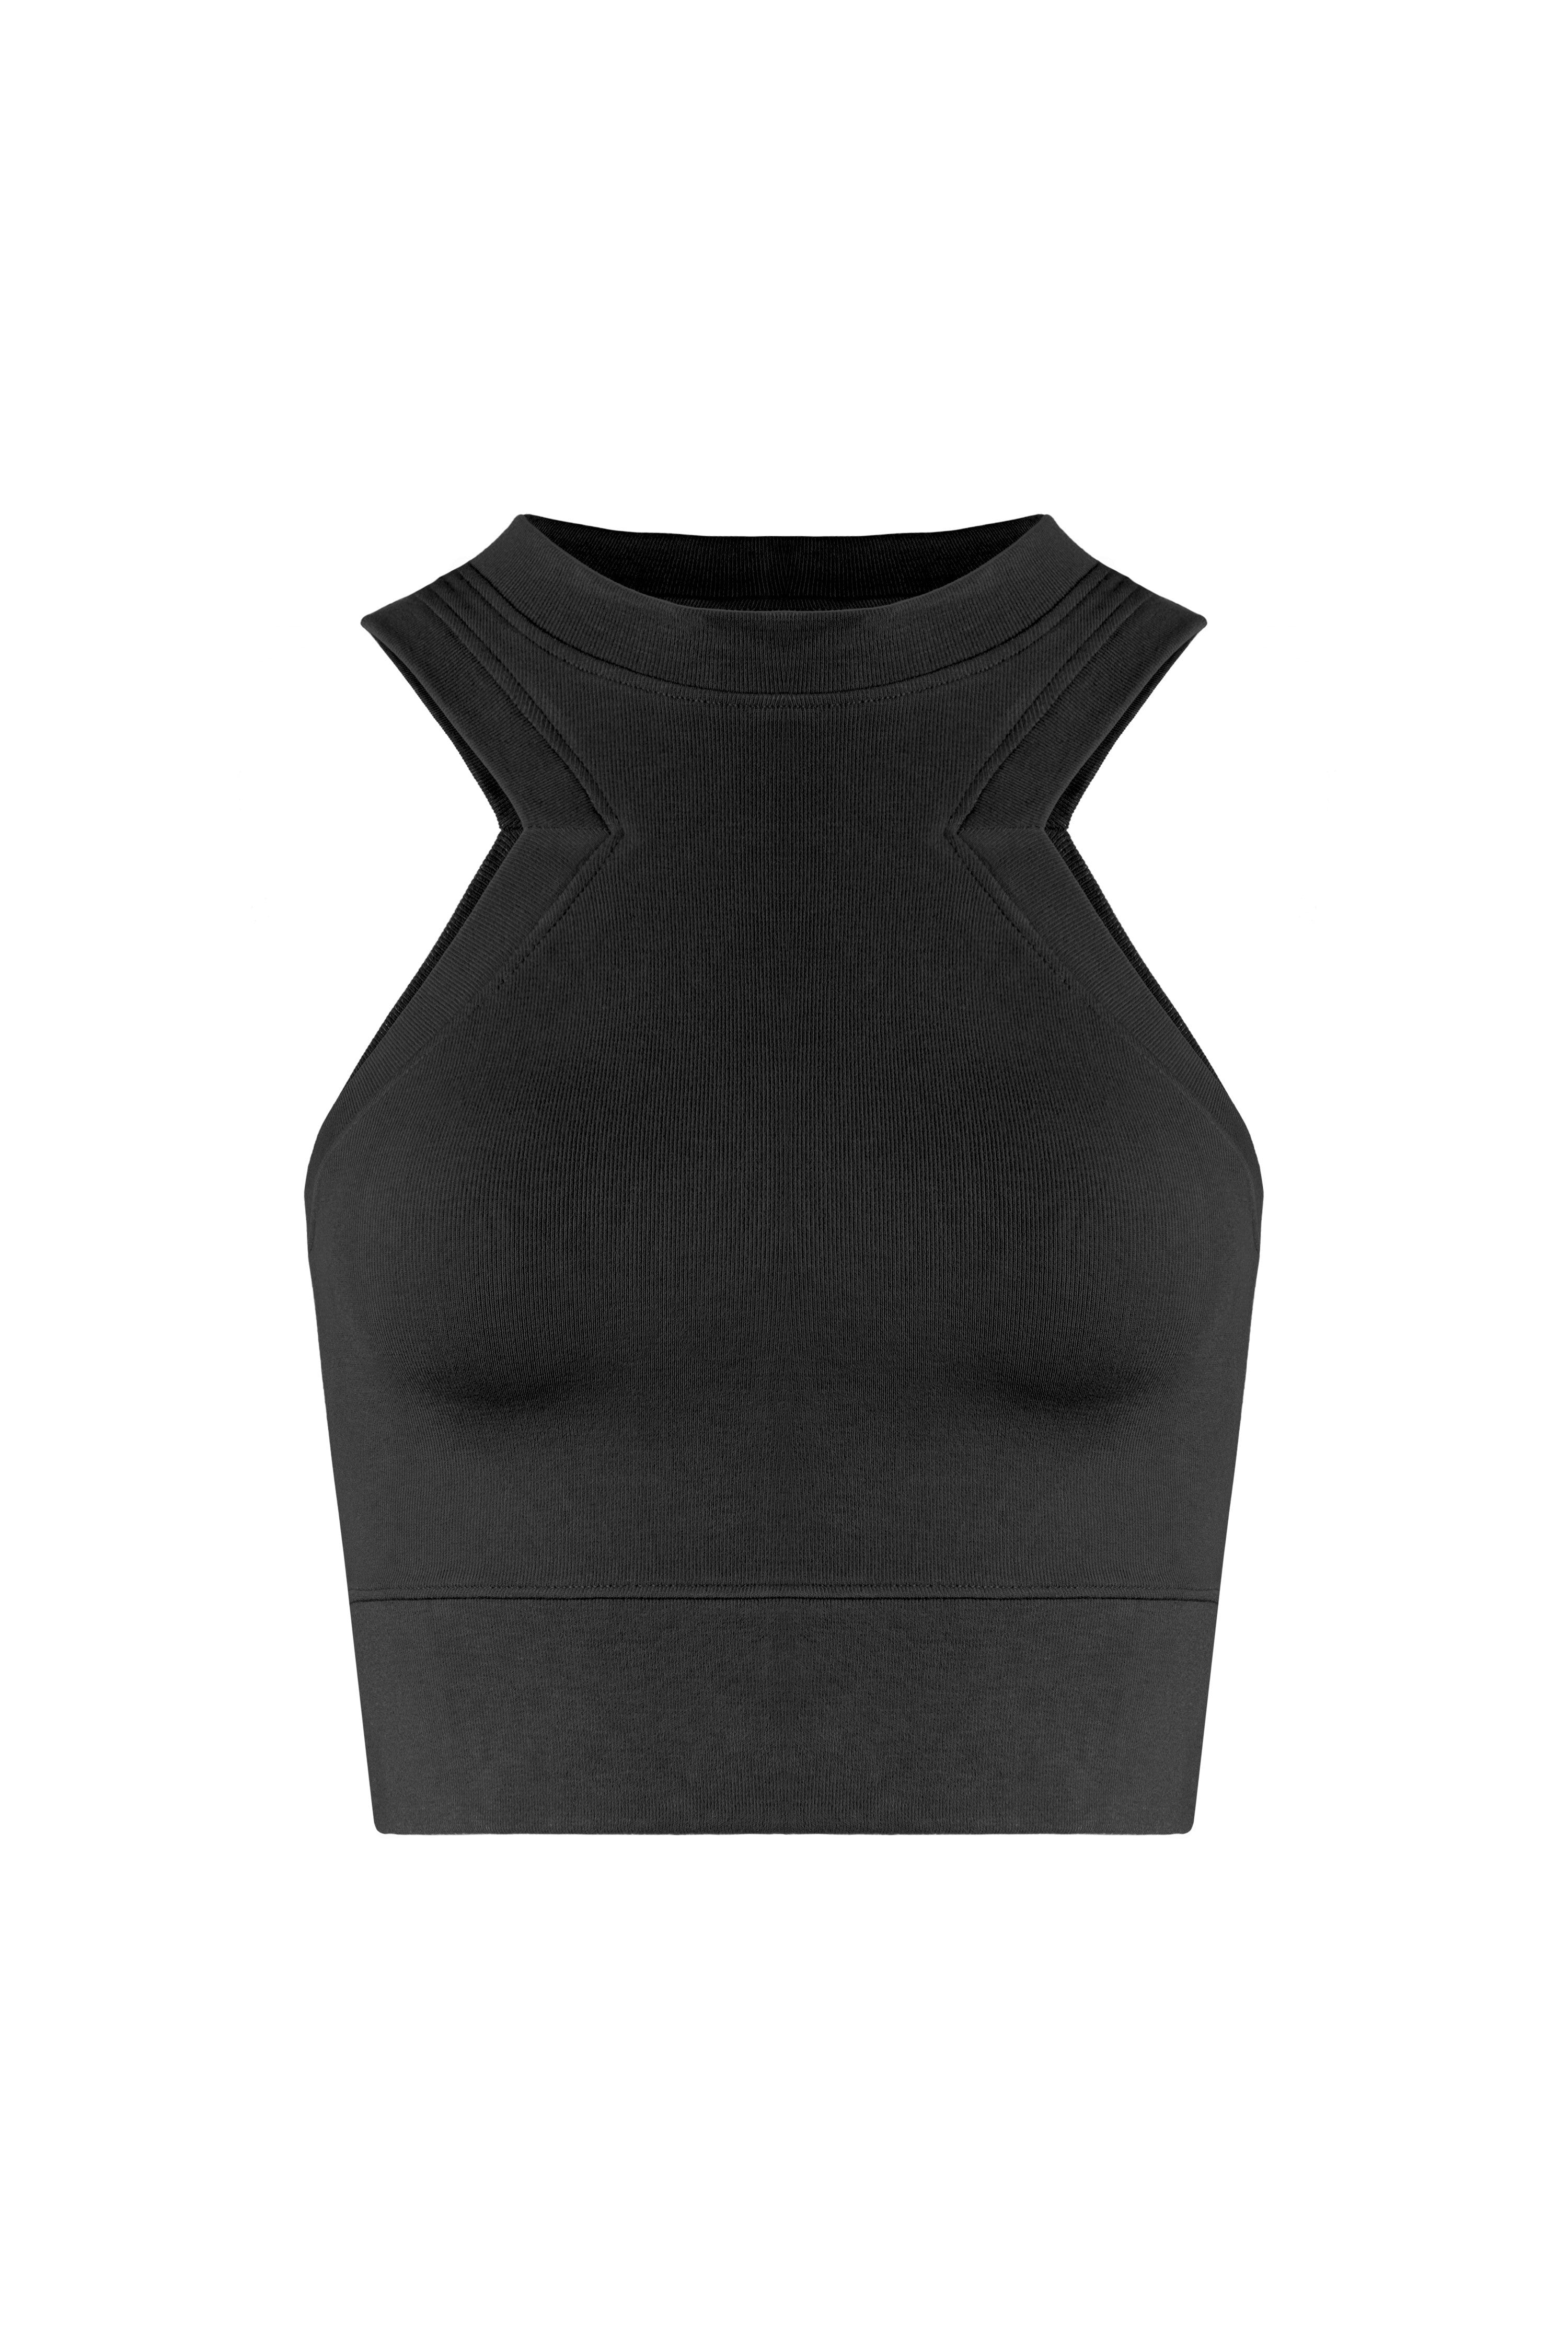 Black Carved Triangular Armhole Banded Crop Tank | Collective Request 